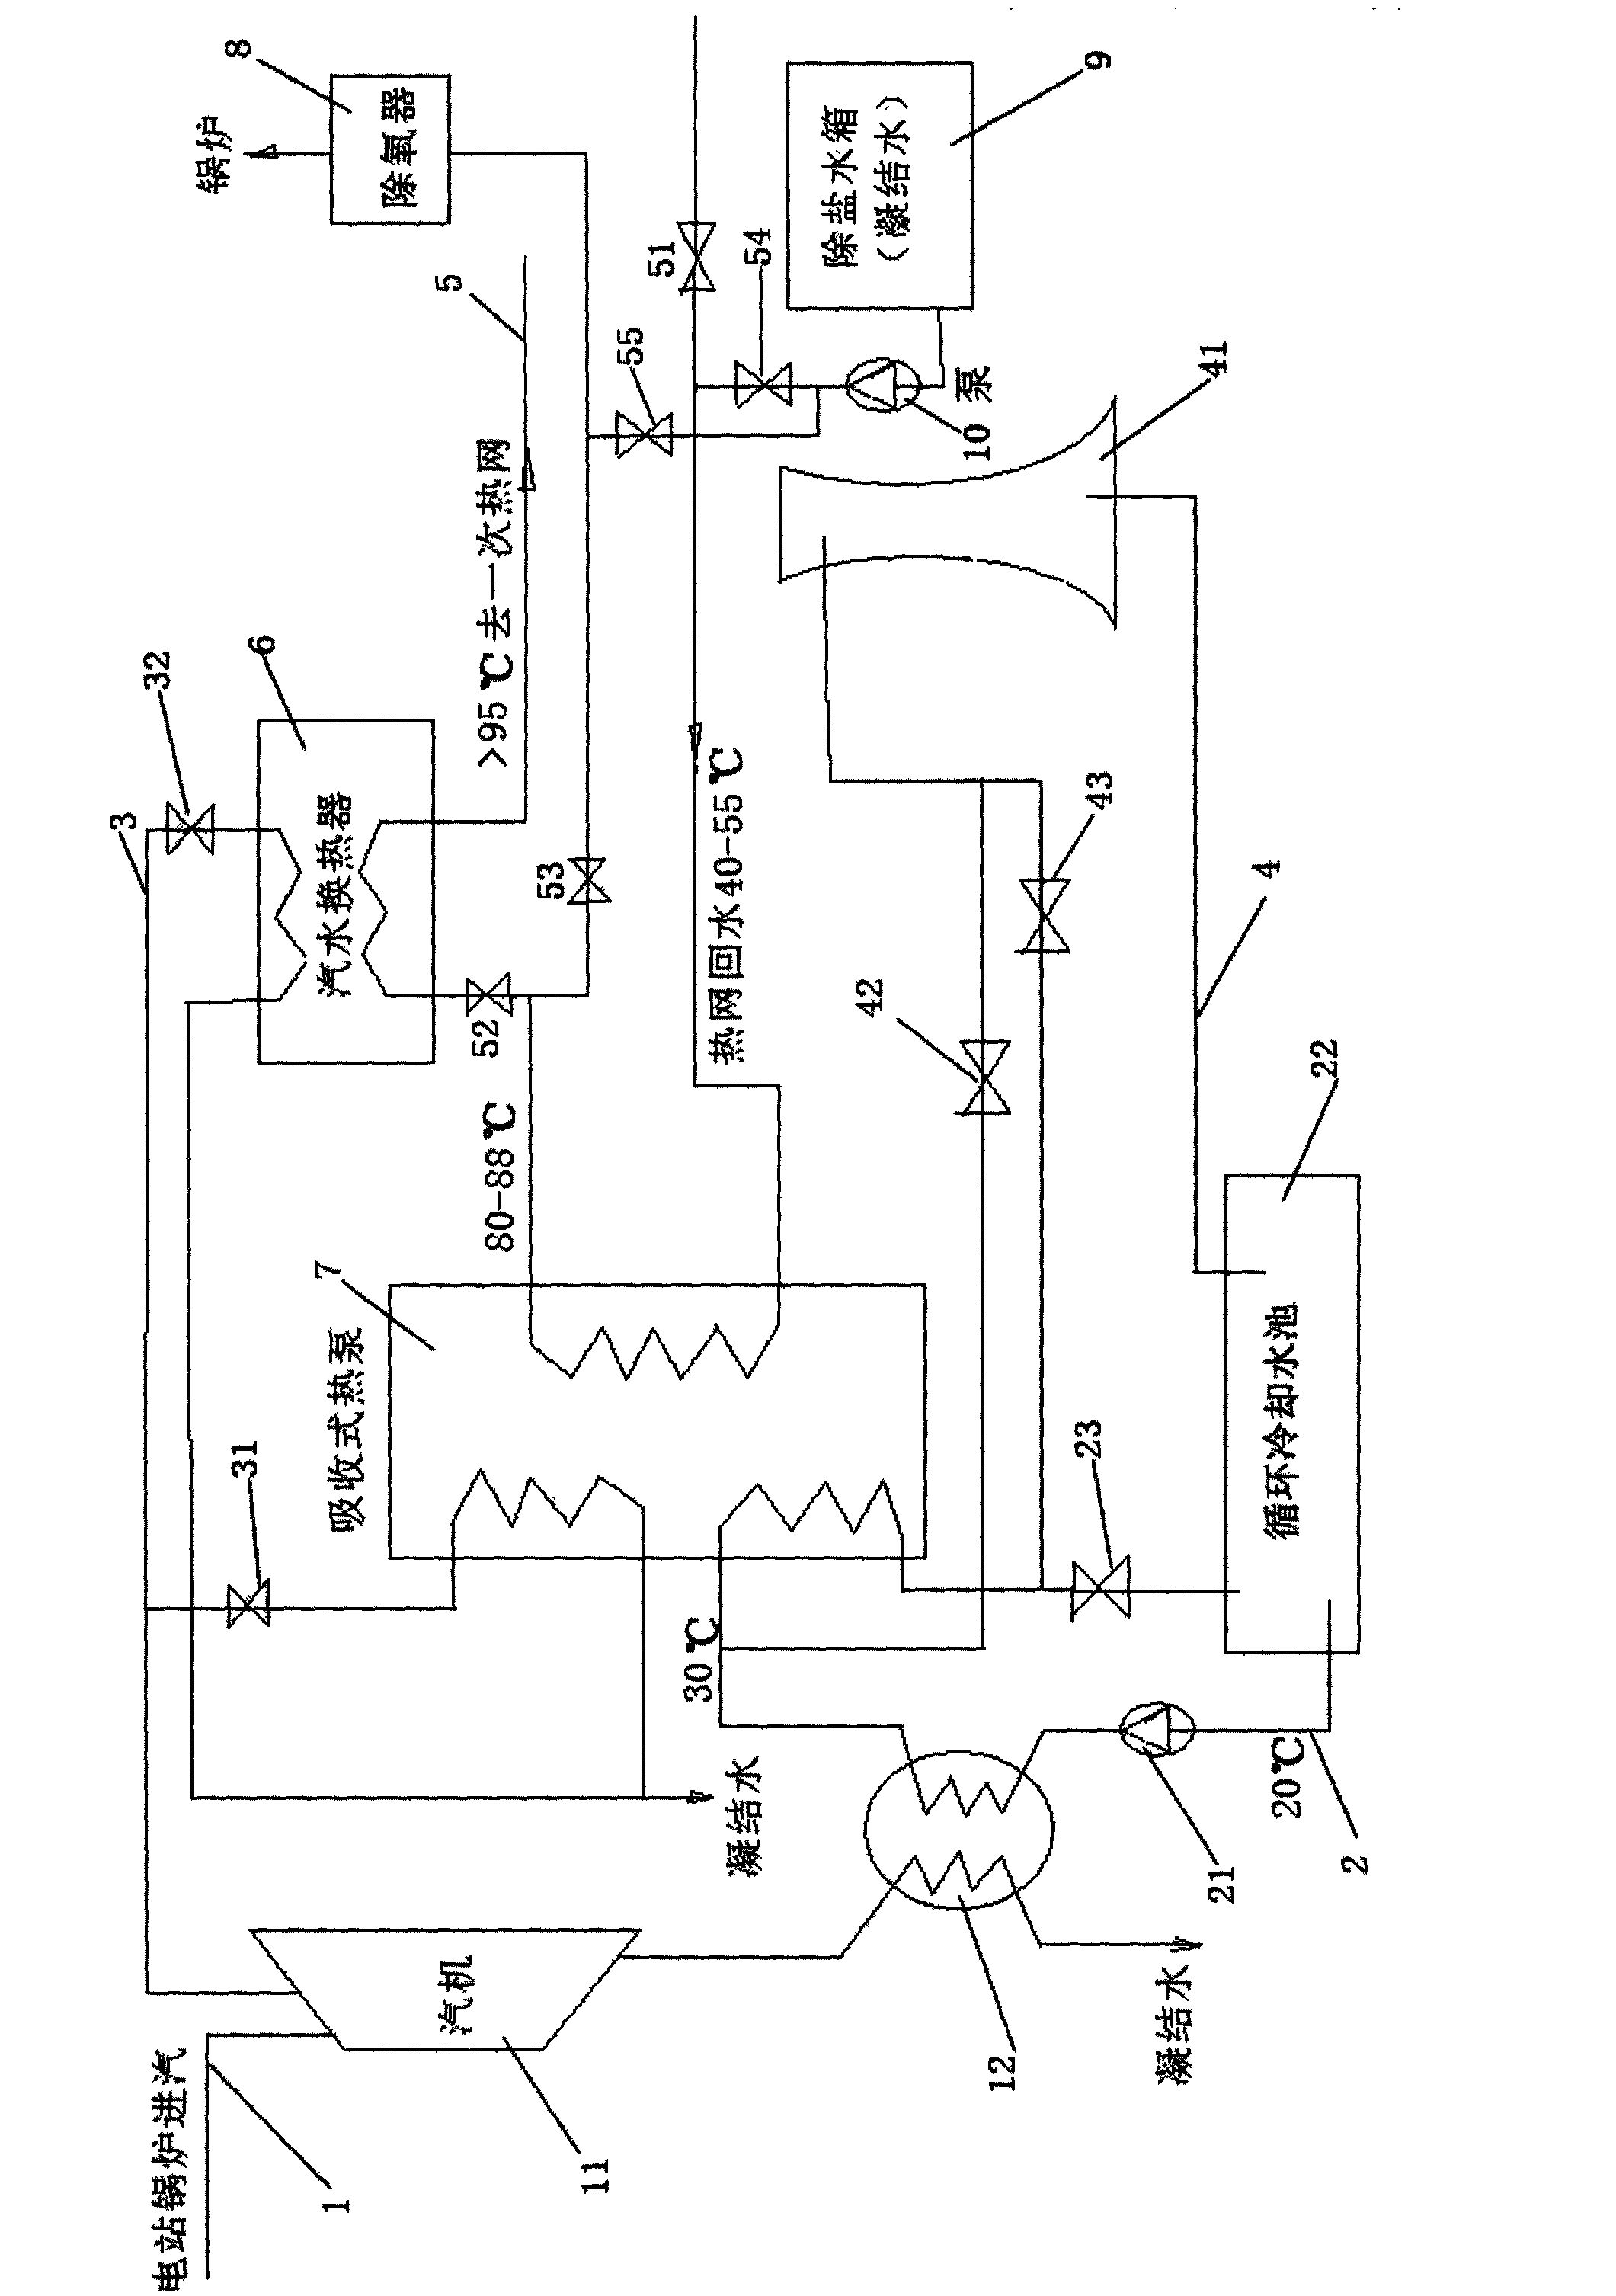 Condensation heat recycle and supply system of power plant